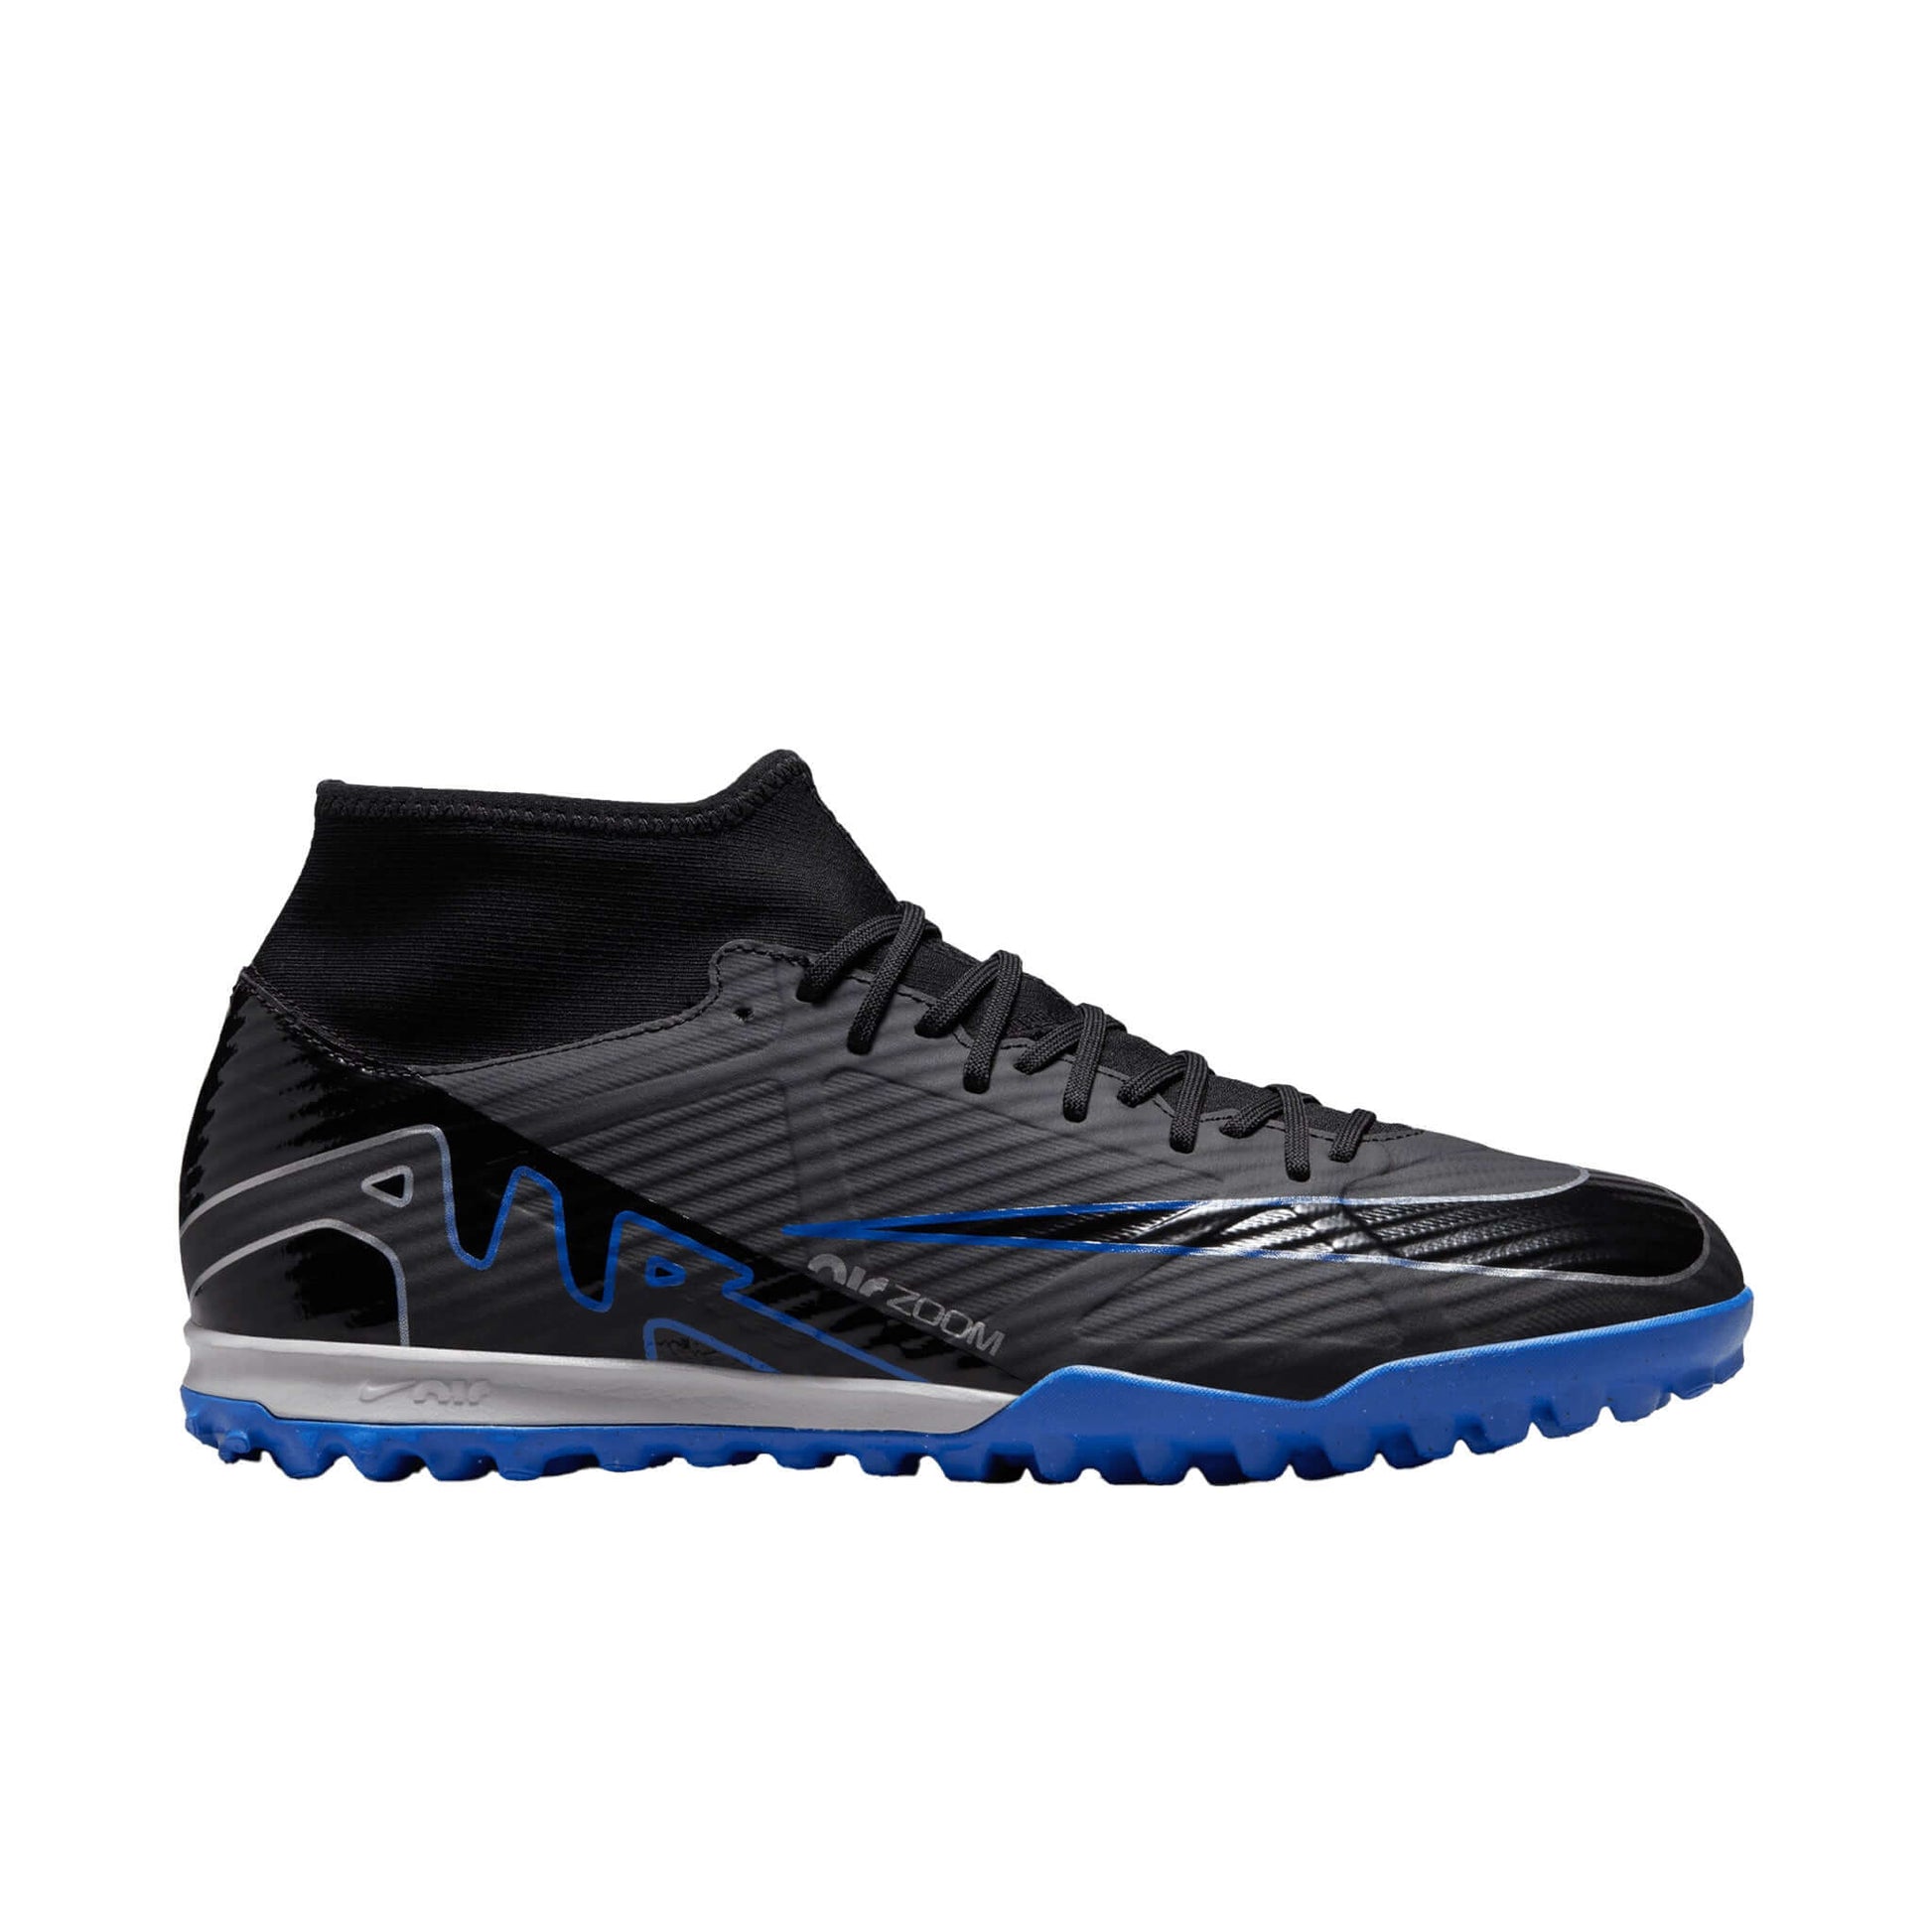 Mercurial Superfly 9 Academy Turf Soccer Shoes | EvangelistaSports.com | Canada's Premiere Soccer Store